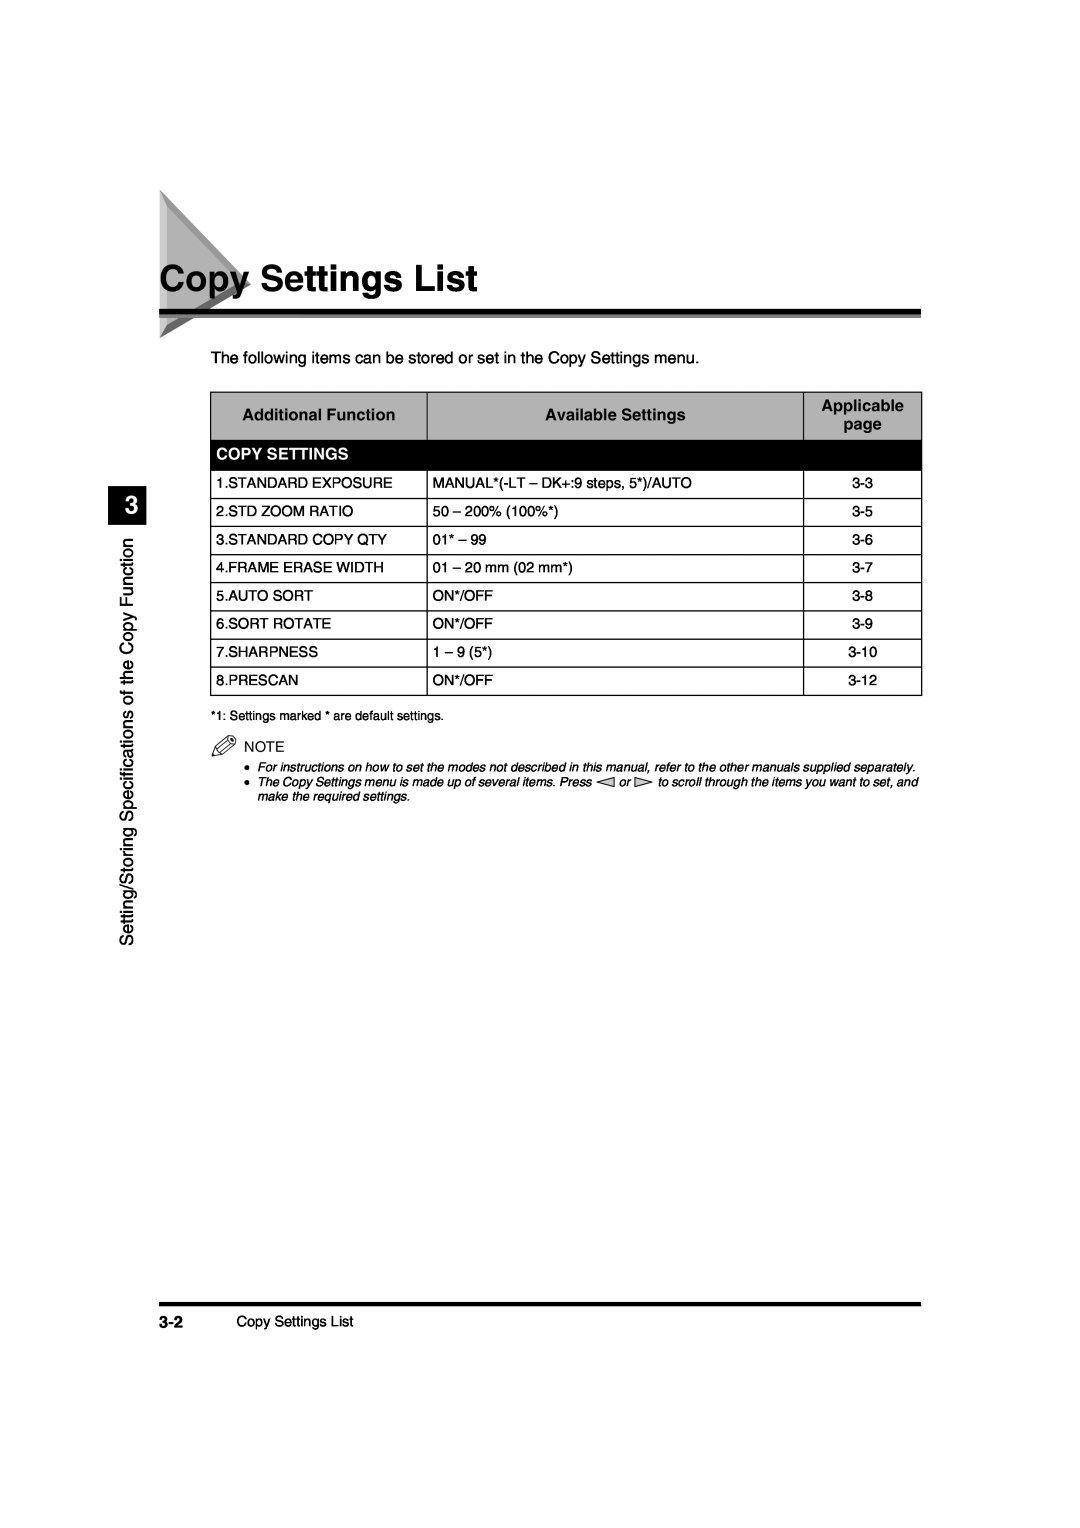 Canon IR1600 Copy Settings List, Setting/Storing Specifications of the Copy Function, Additional Function, Applicable 